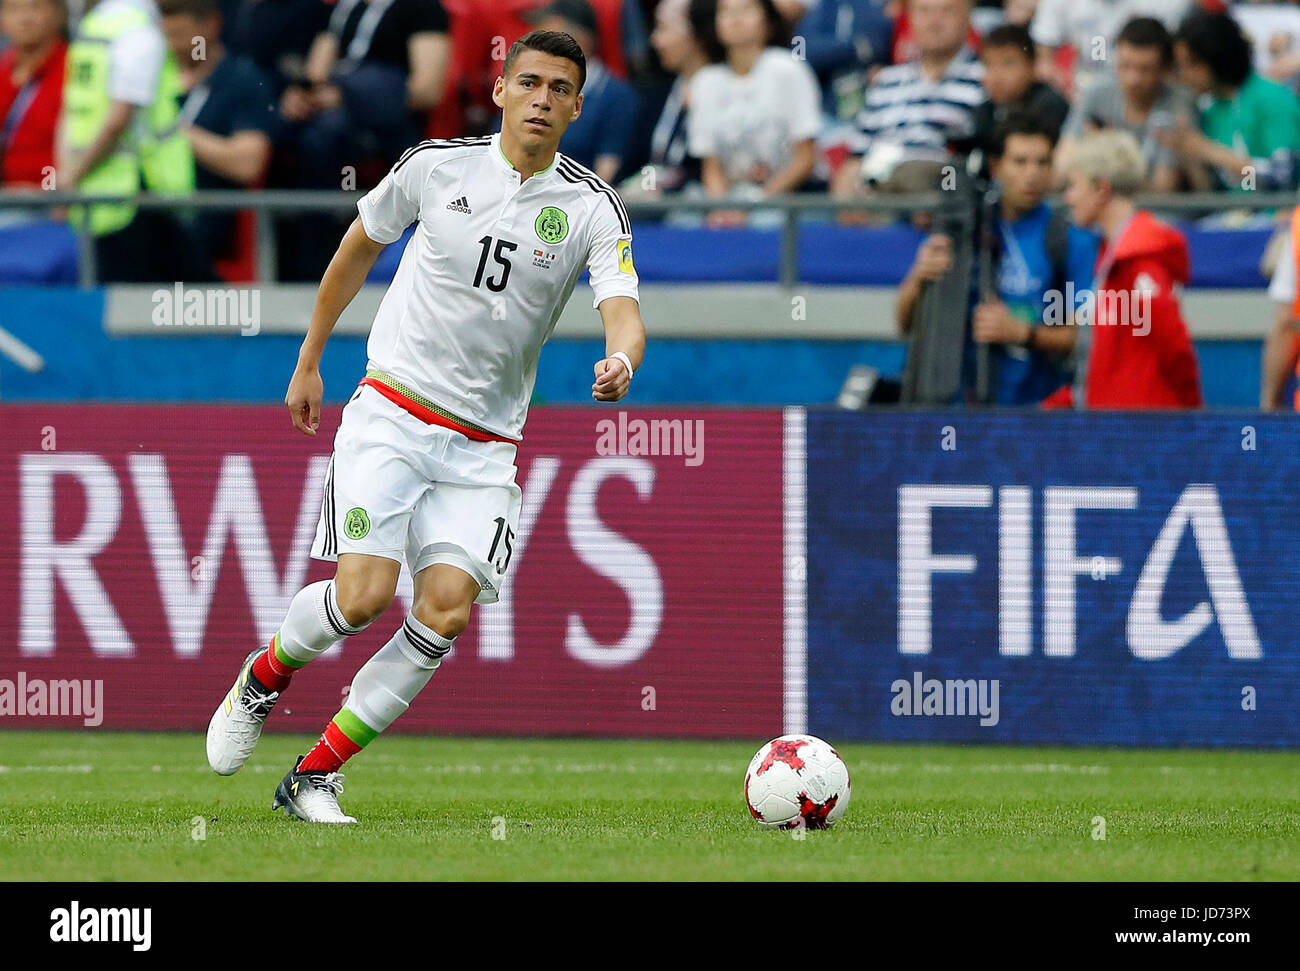 KAZAN, RT - 18.06.2017: PORTUGAL VS. MEXICO - MORENO Hector of Mexico during a match between Portugal and Mexico valid for the first round of the Confederations Cup 2017 on Sunday (18), held at the Kazan Arena in Kazan, Russia. (Photo: Rodolfo Buhrer/La Imagem/Fotoarena) Stock Photo